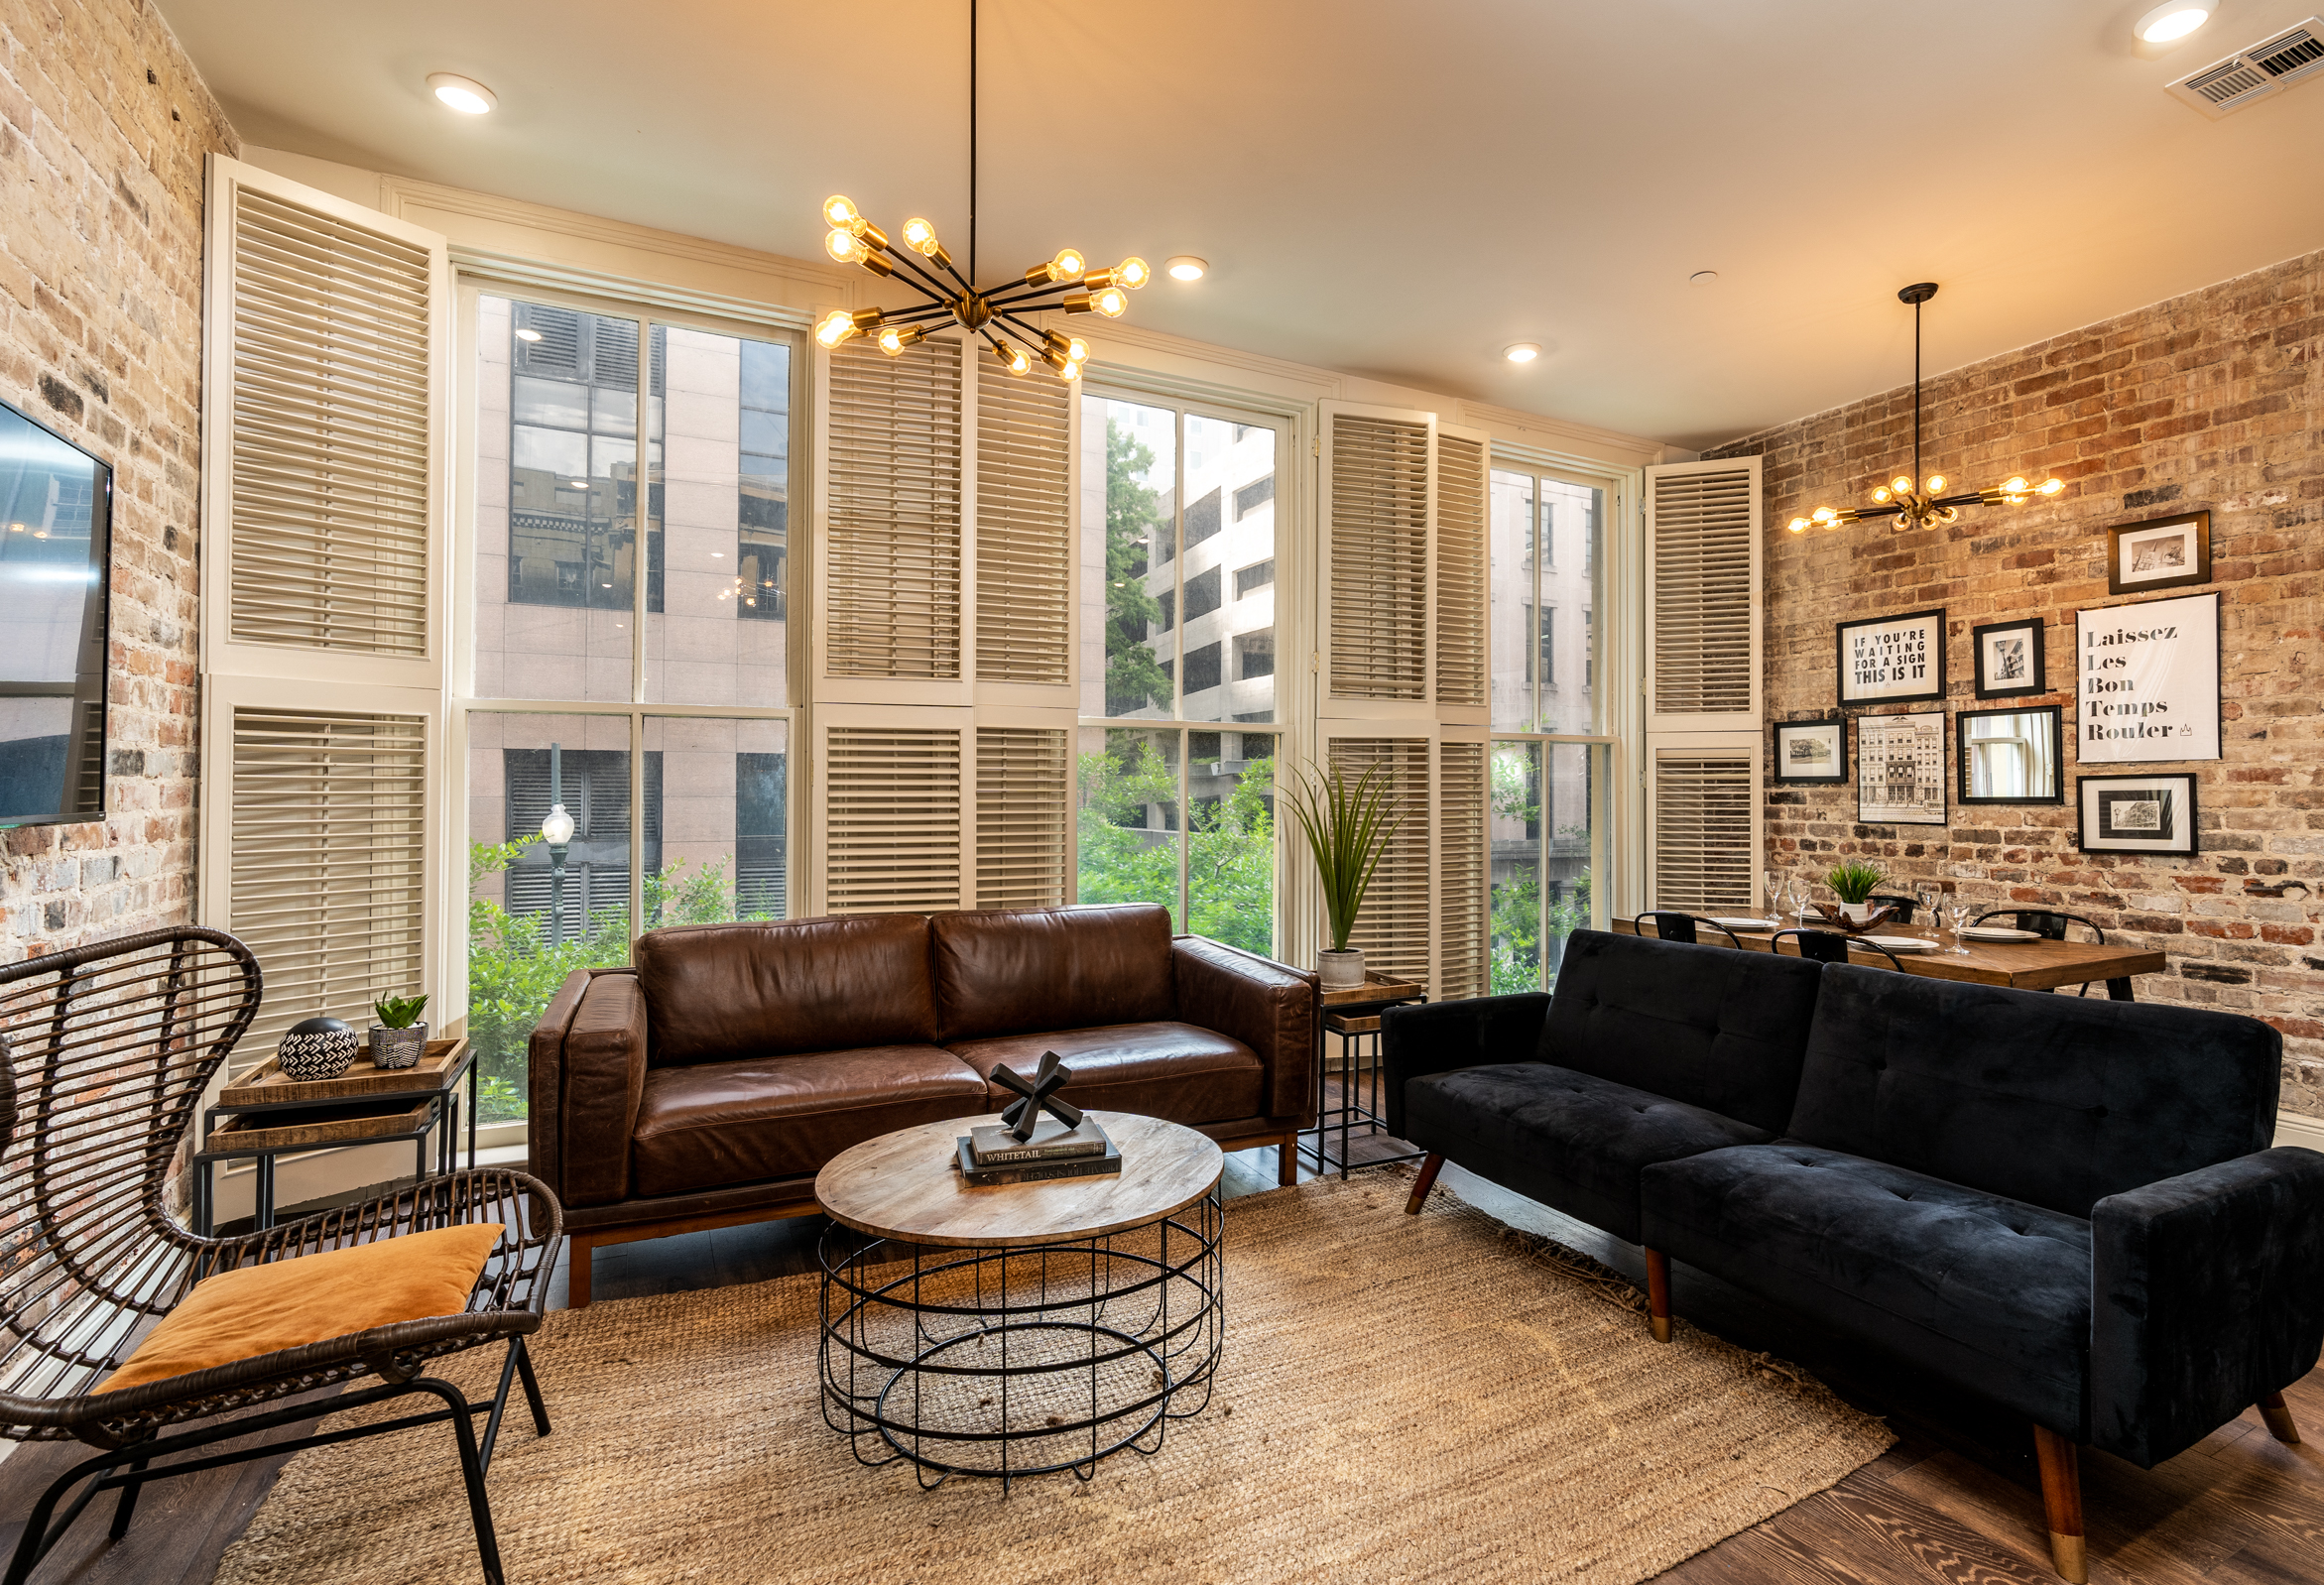 The Alexandre Unit 402 living room, a New Orleans luxury rental.